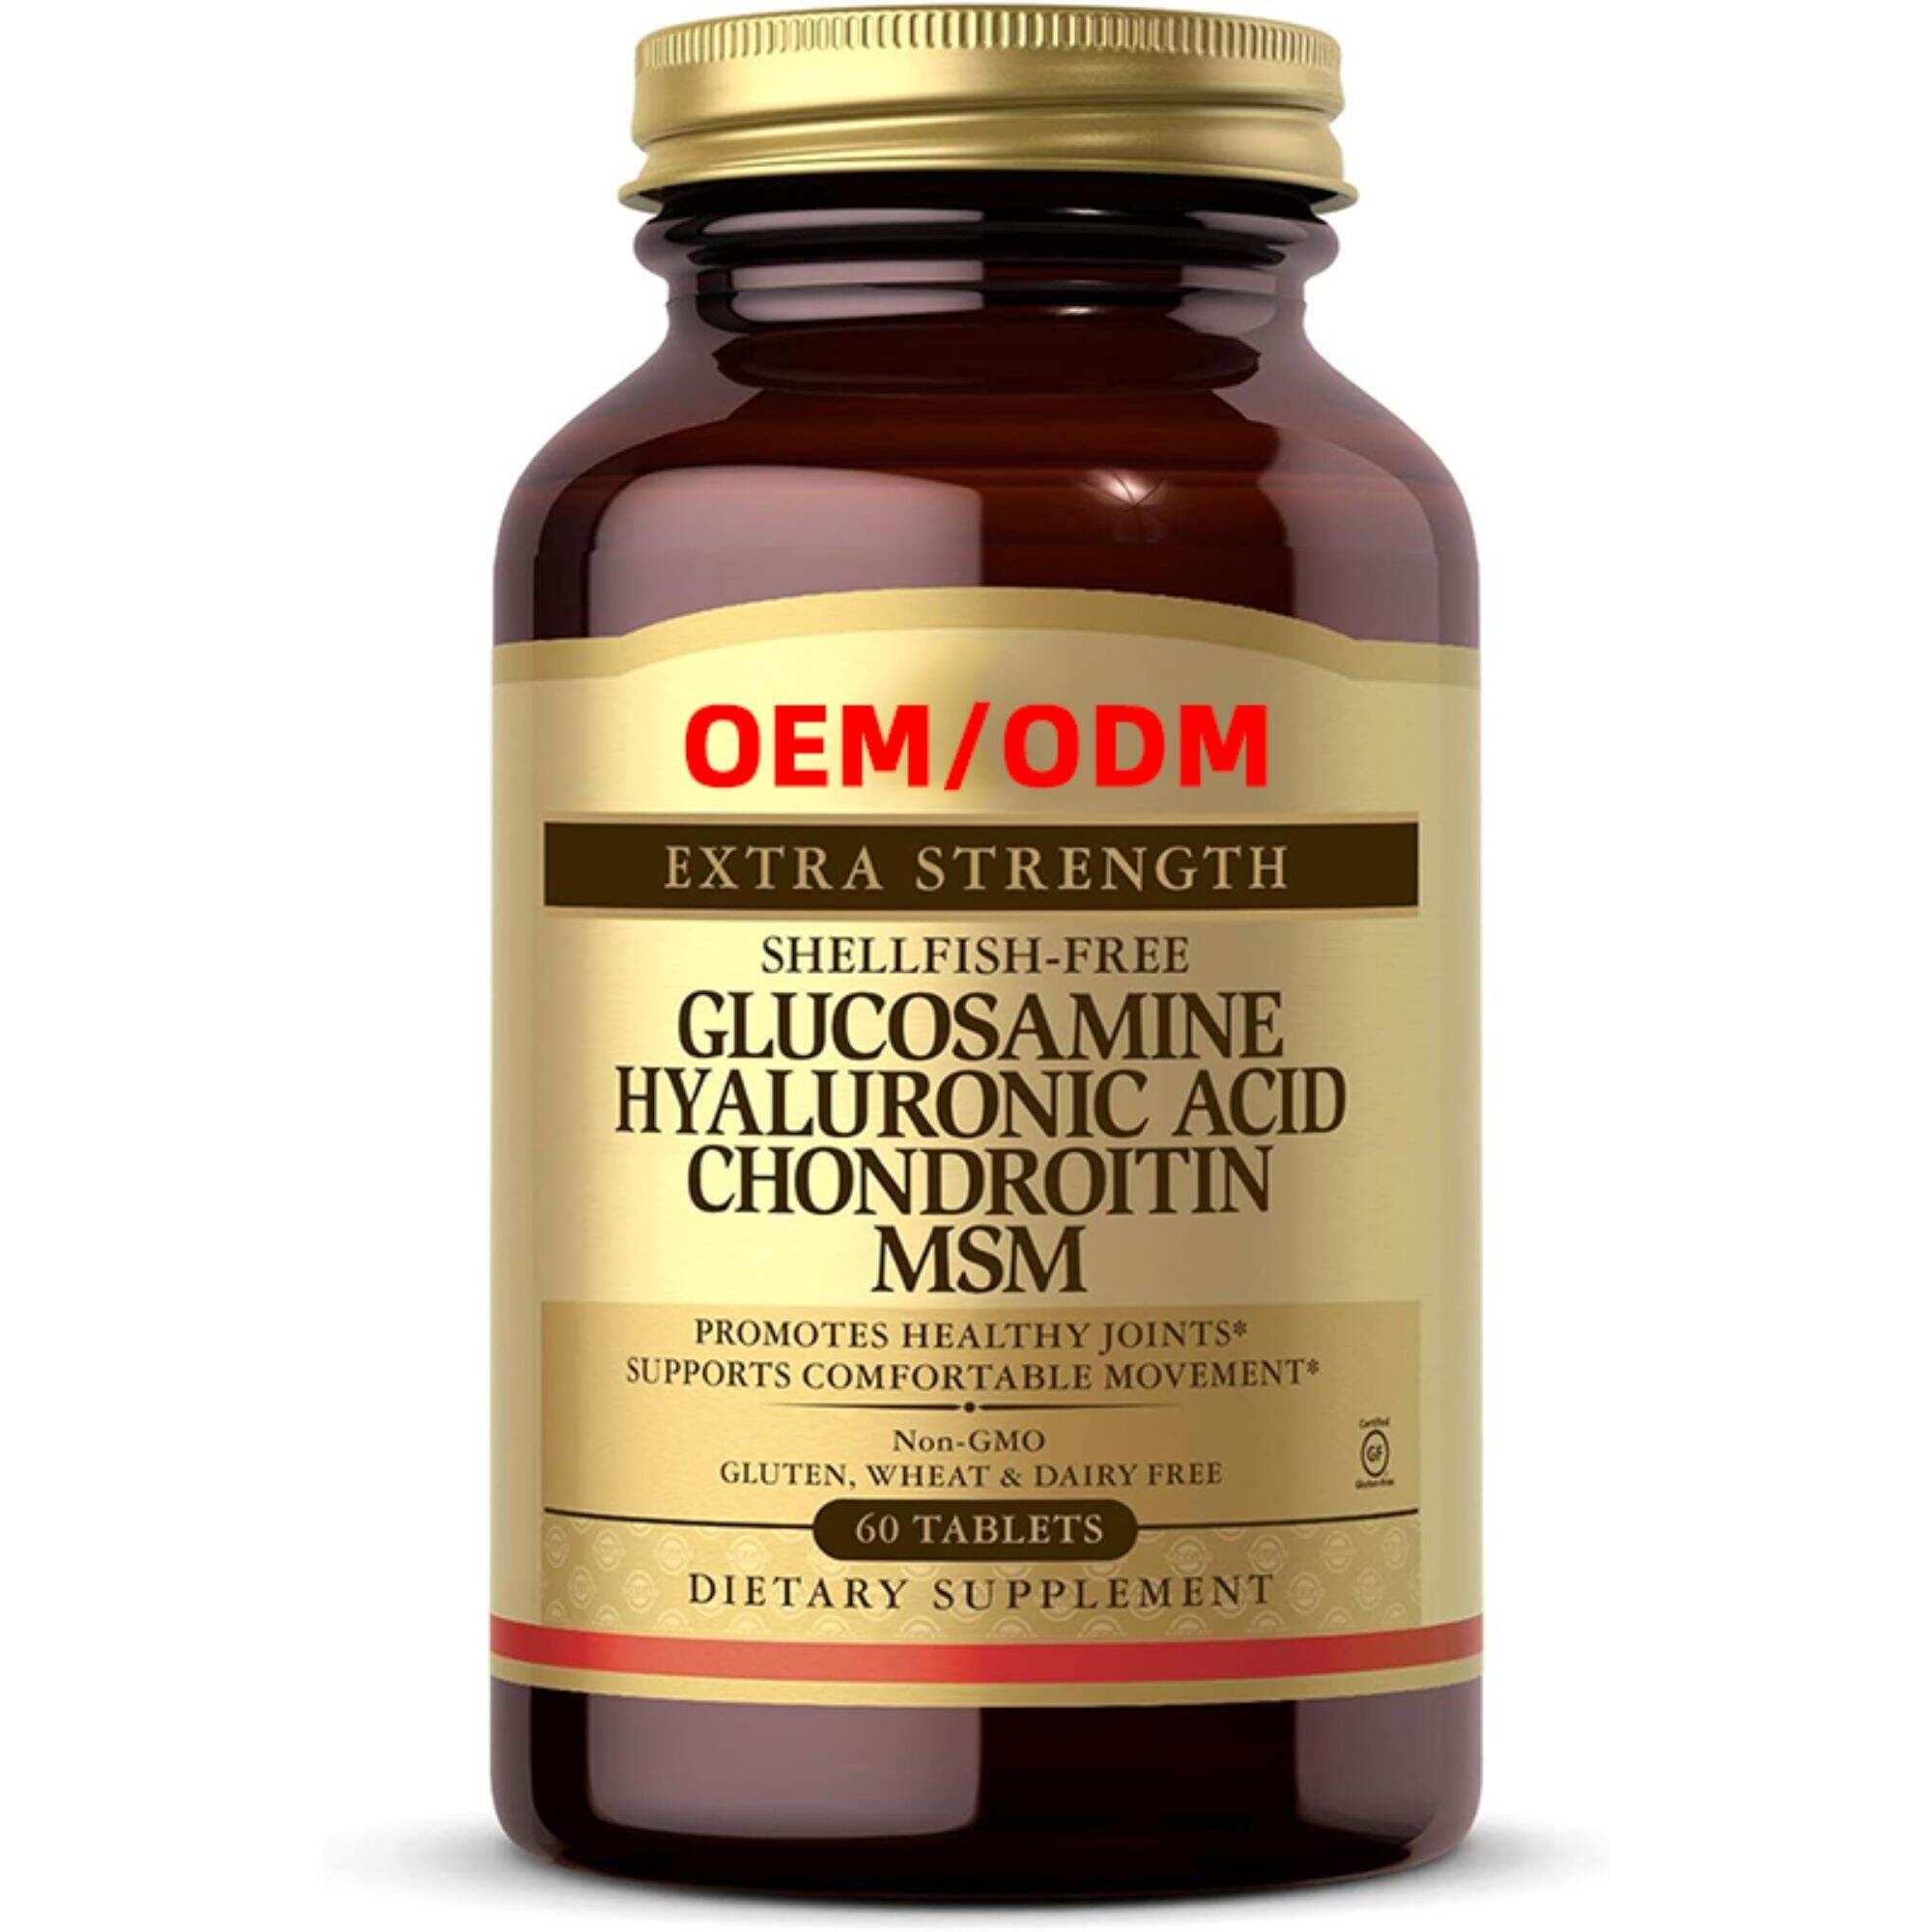 Joint Support  Glucosamine Hyaluronic Acid Chondroitin MSM (Shellfish-Free), 60 Tablets Comfort  Supports Active Lifestyles Non-GMO, Gluten Free, Dairy Free 20 Servings